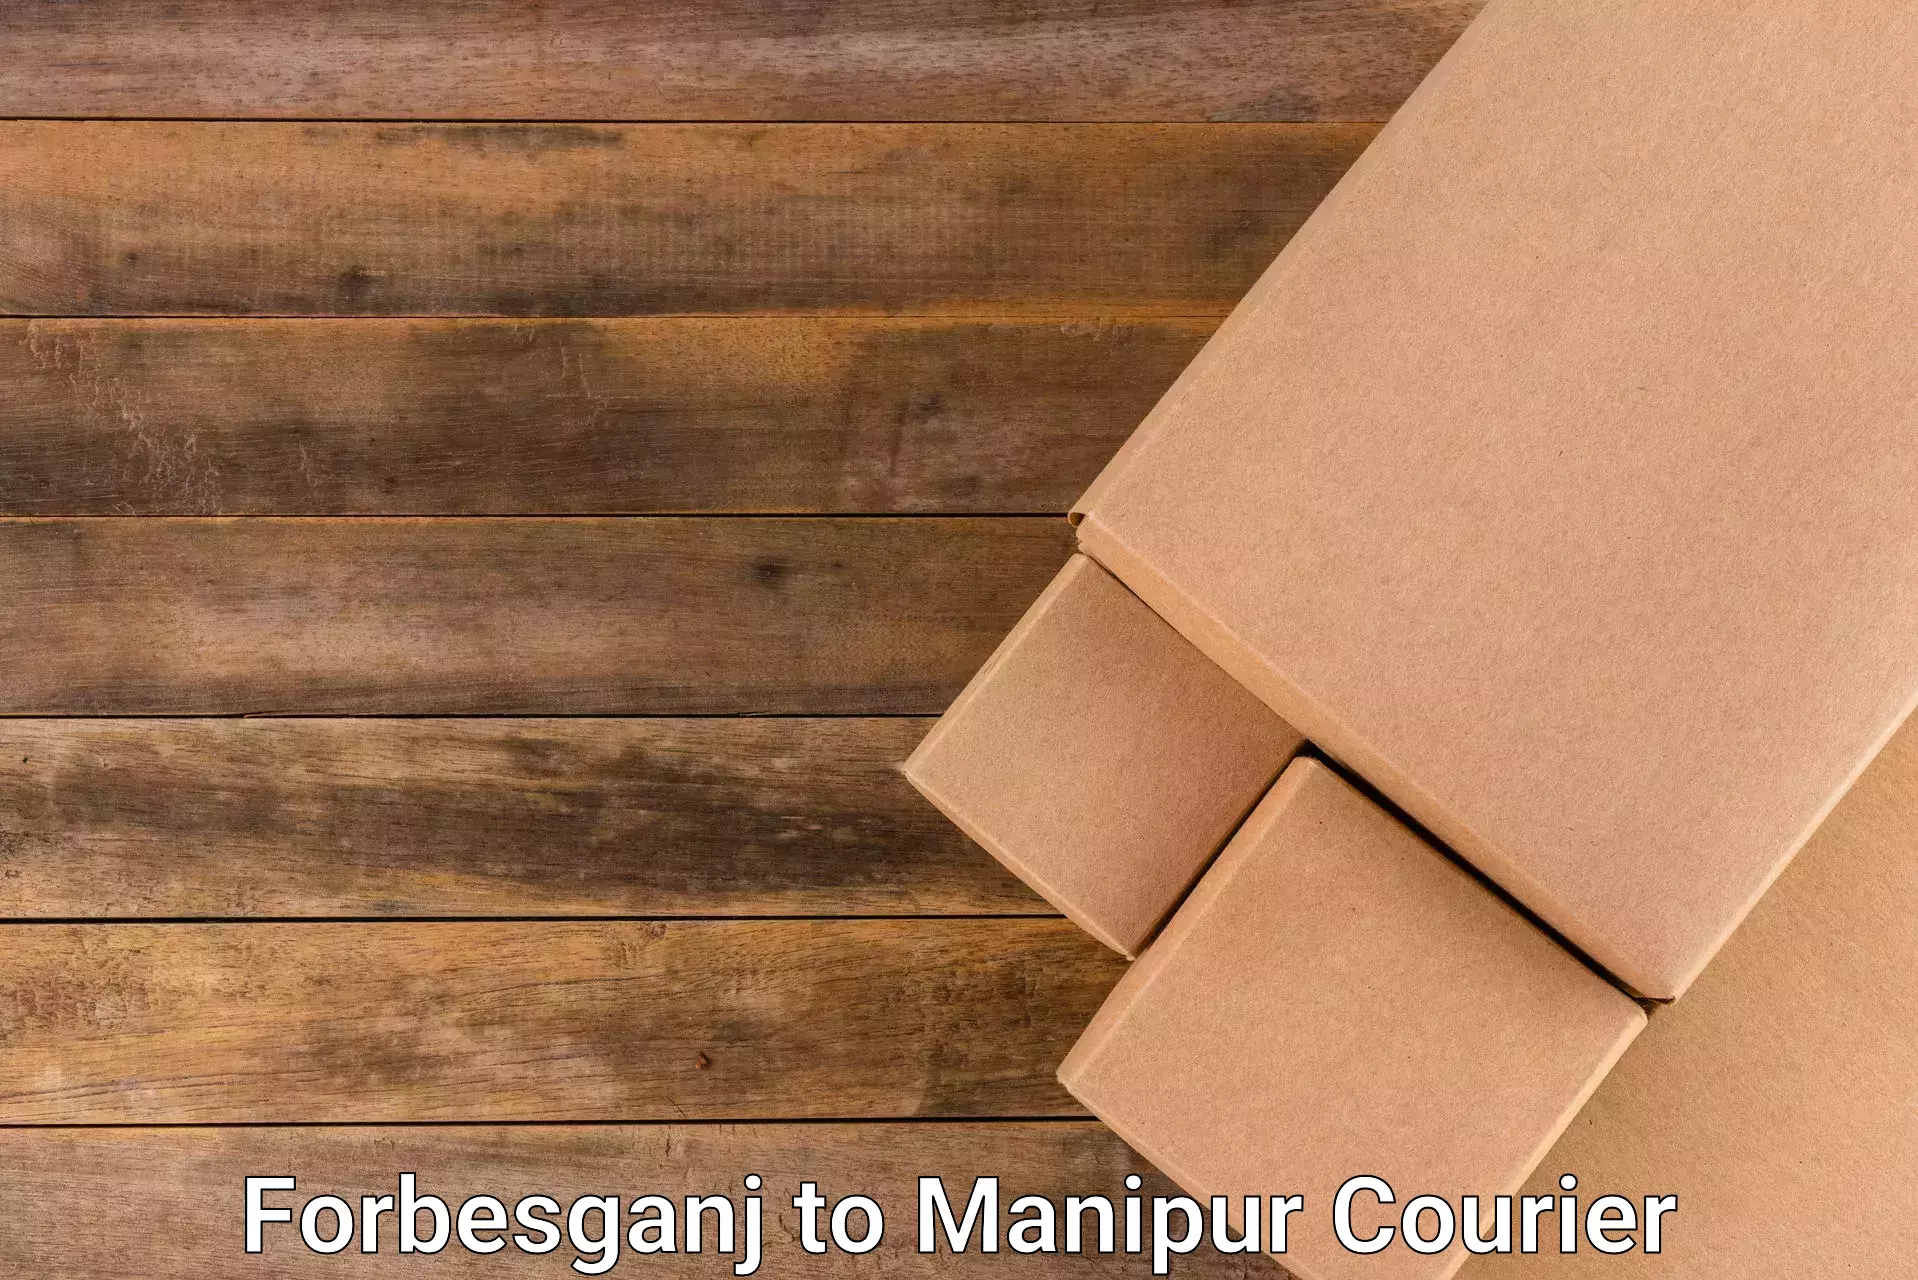 User-friendly delivery service Forbesganj to Manipur